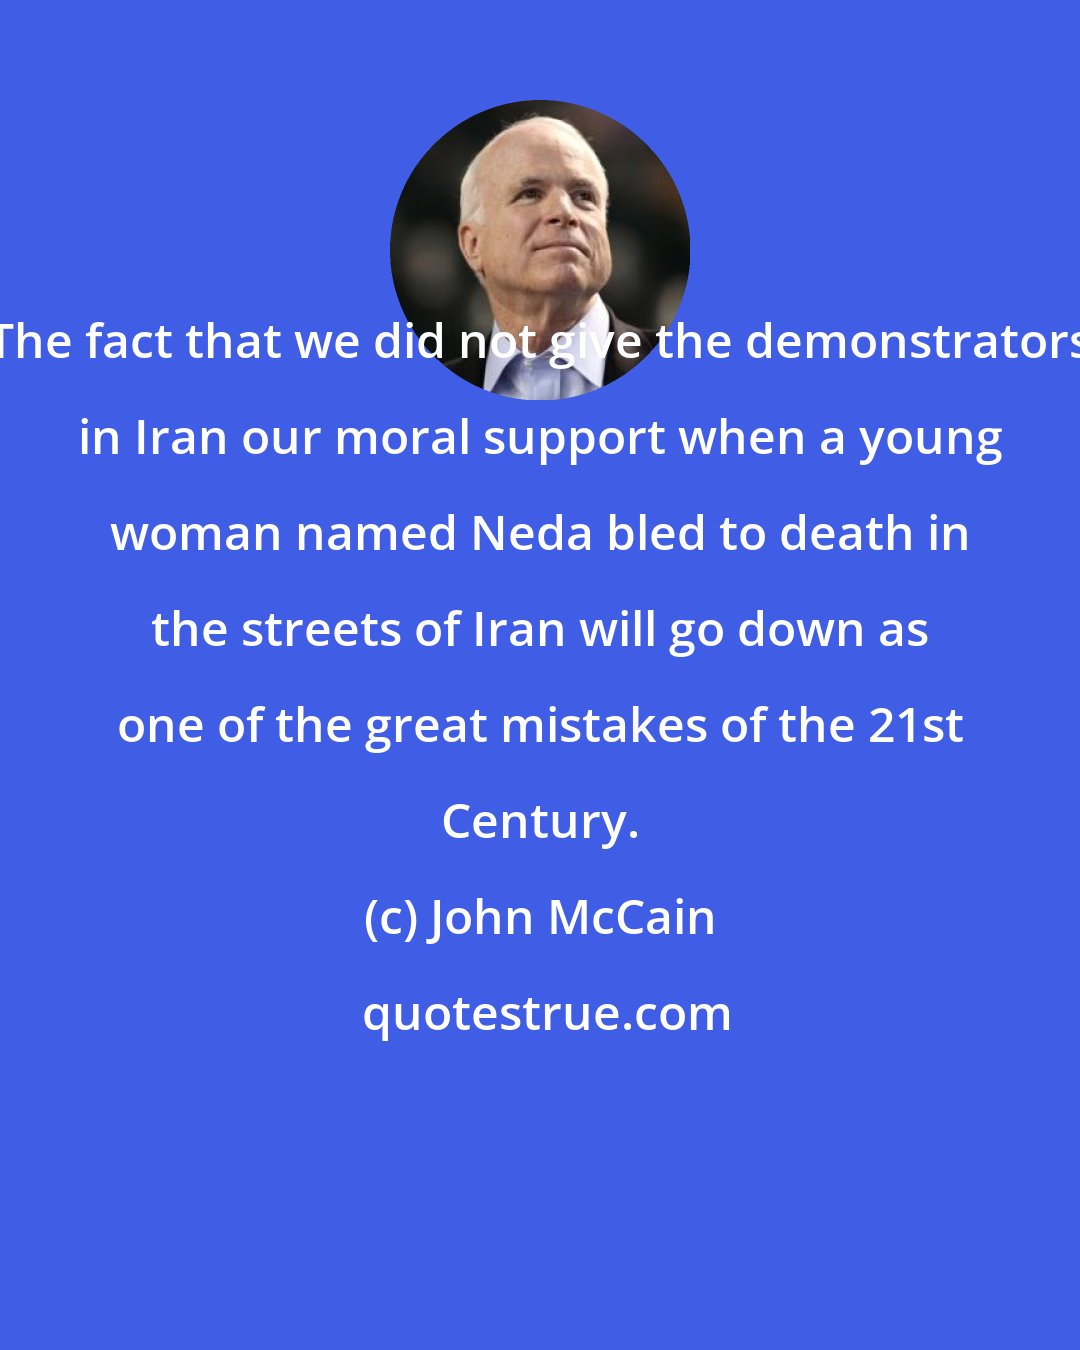 John McCain: The fact that we did not give the demonstrators in Iran our moral support when a young woman named Neda bled to death in the streets of Iran will go down as one of the great mistakes of the 21st Century.